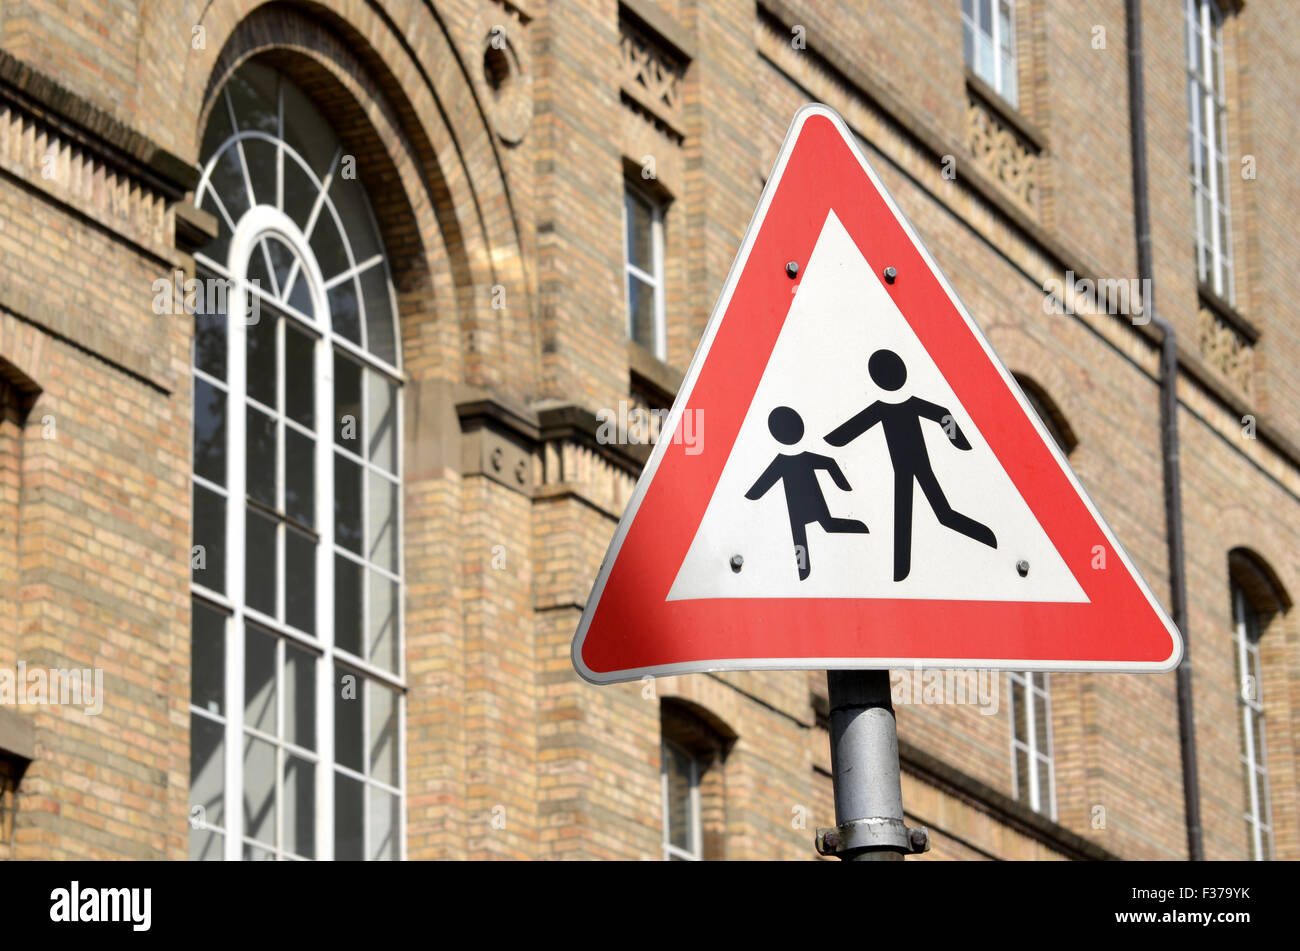 Road sign, warning, children playing, Germany Stock Photo